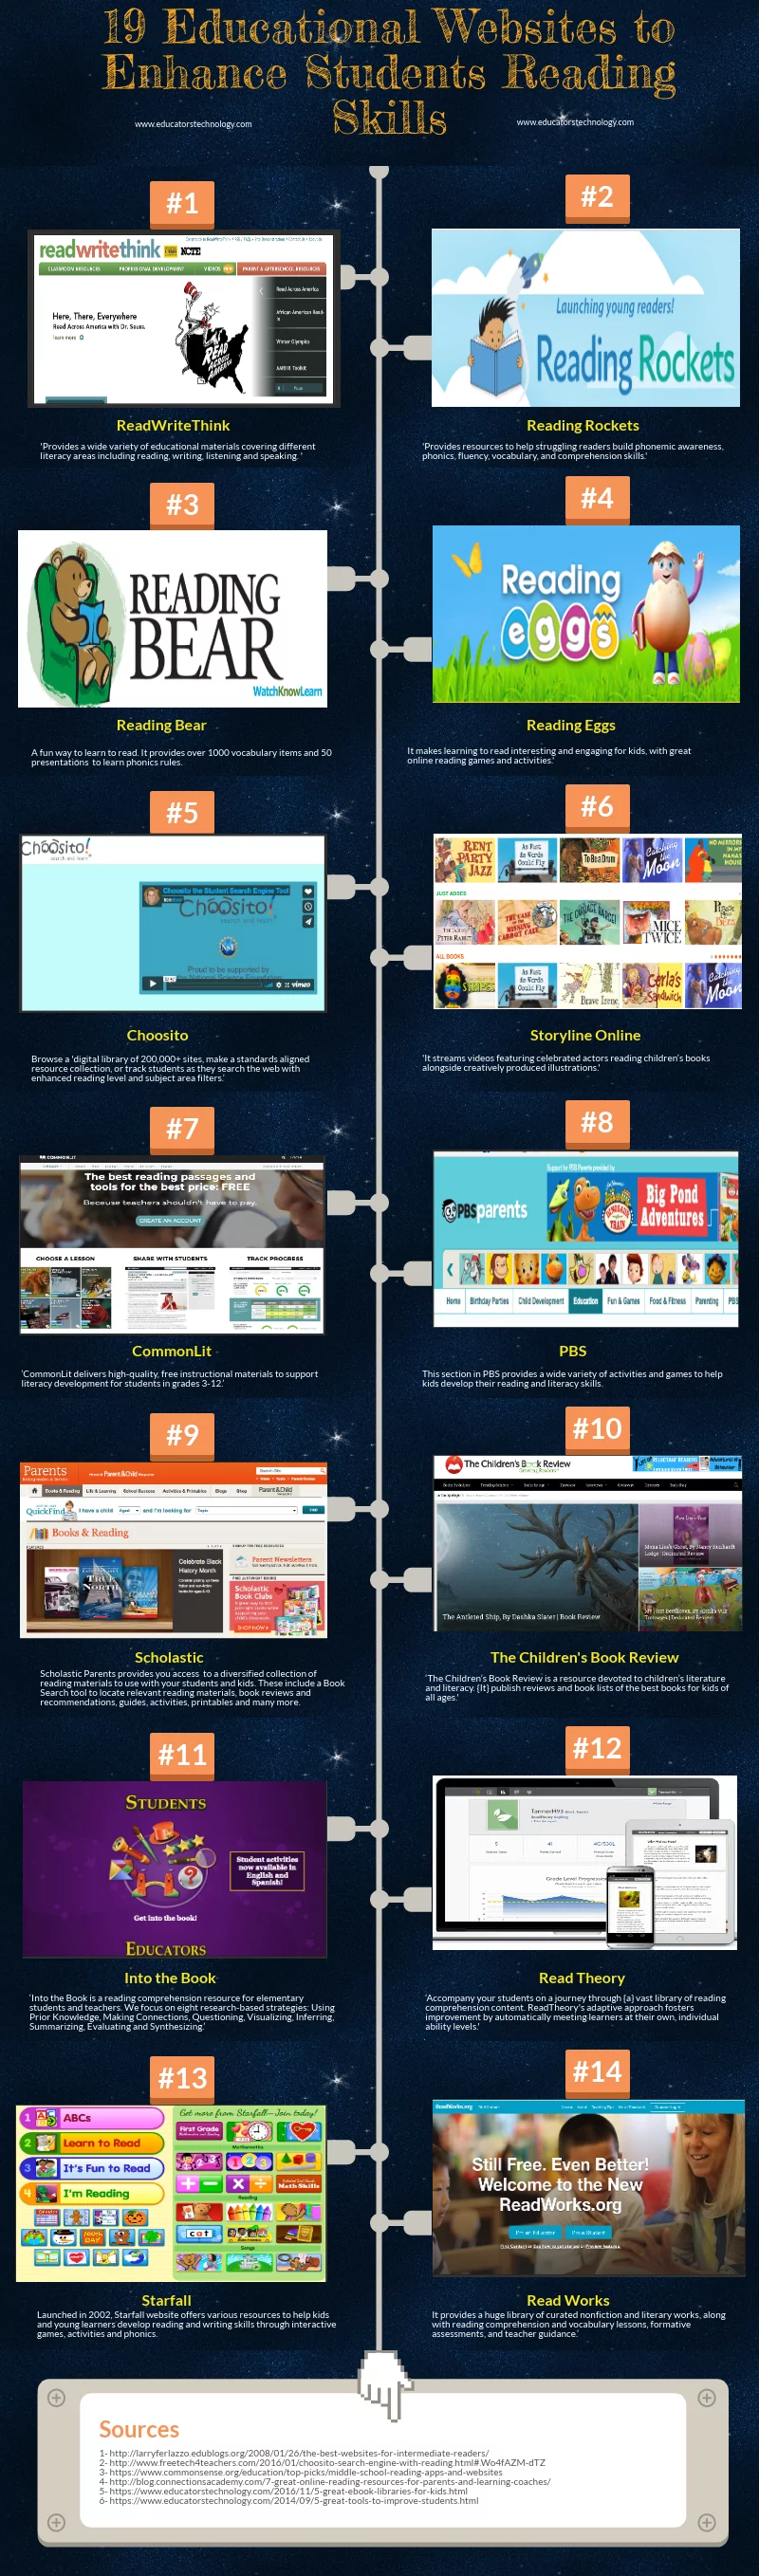 A Handy Infographic Featuring 19 Reading Resources for Teachers and Students